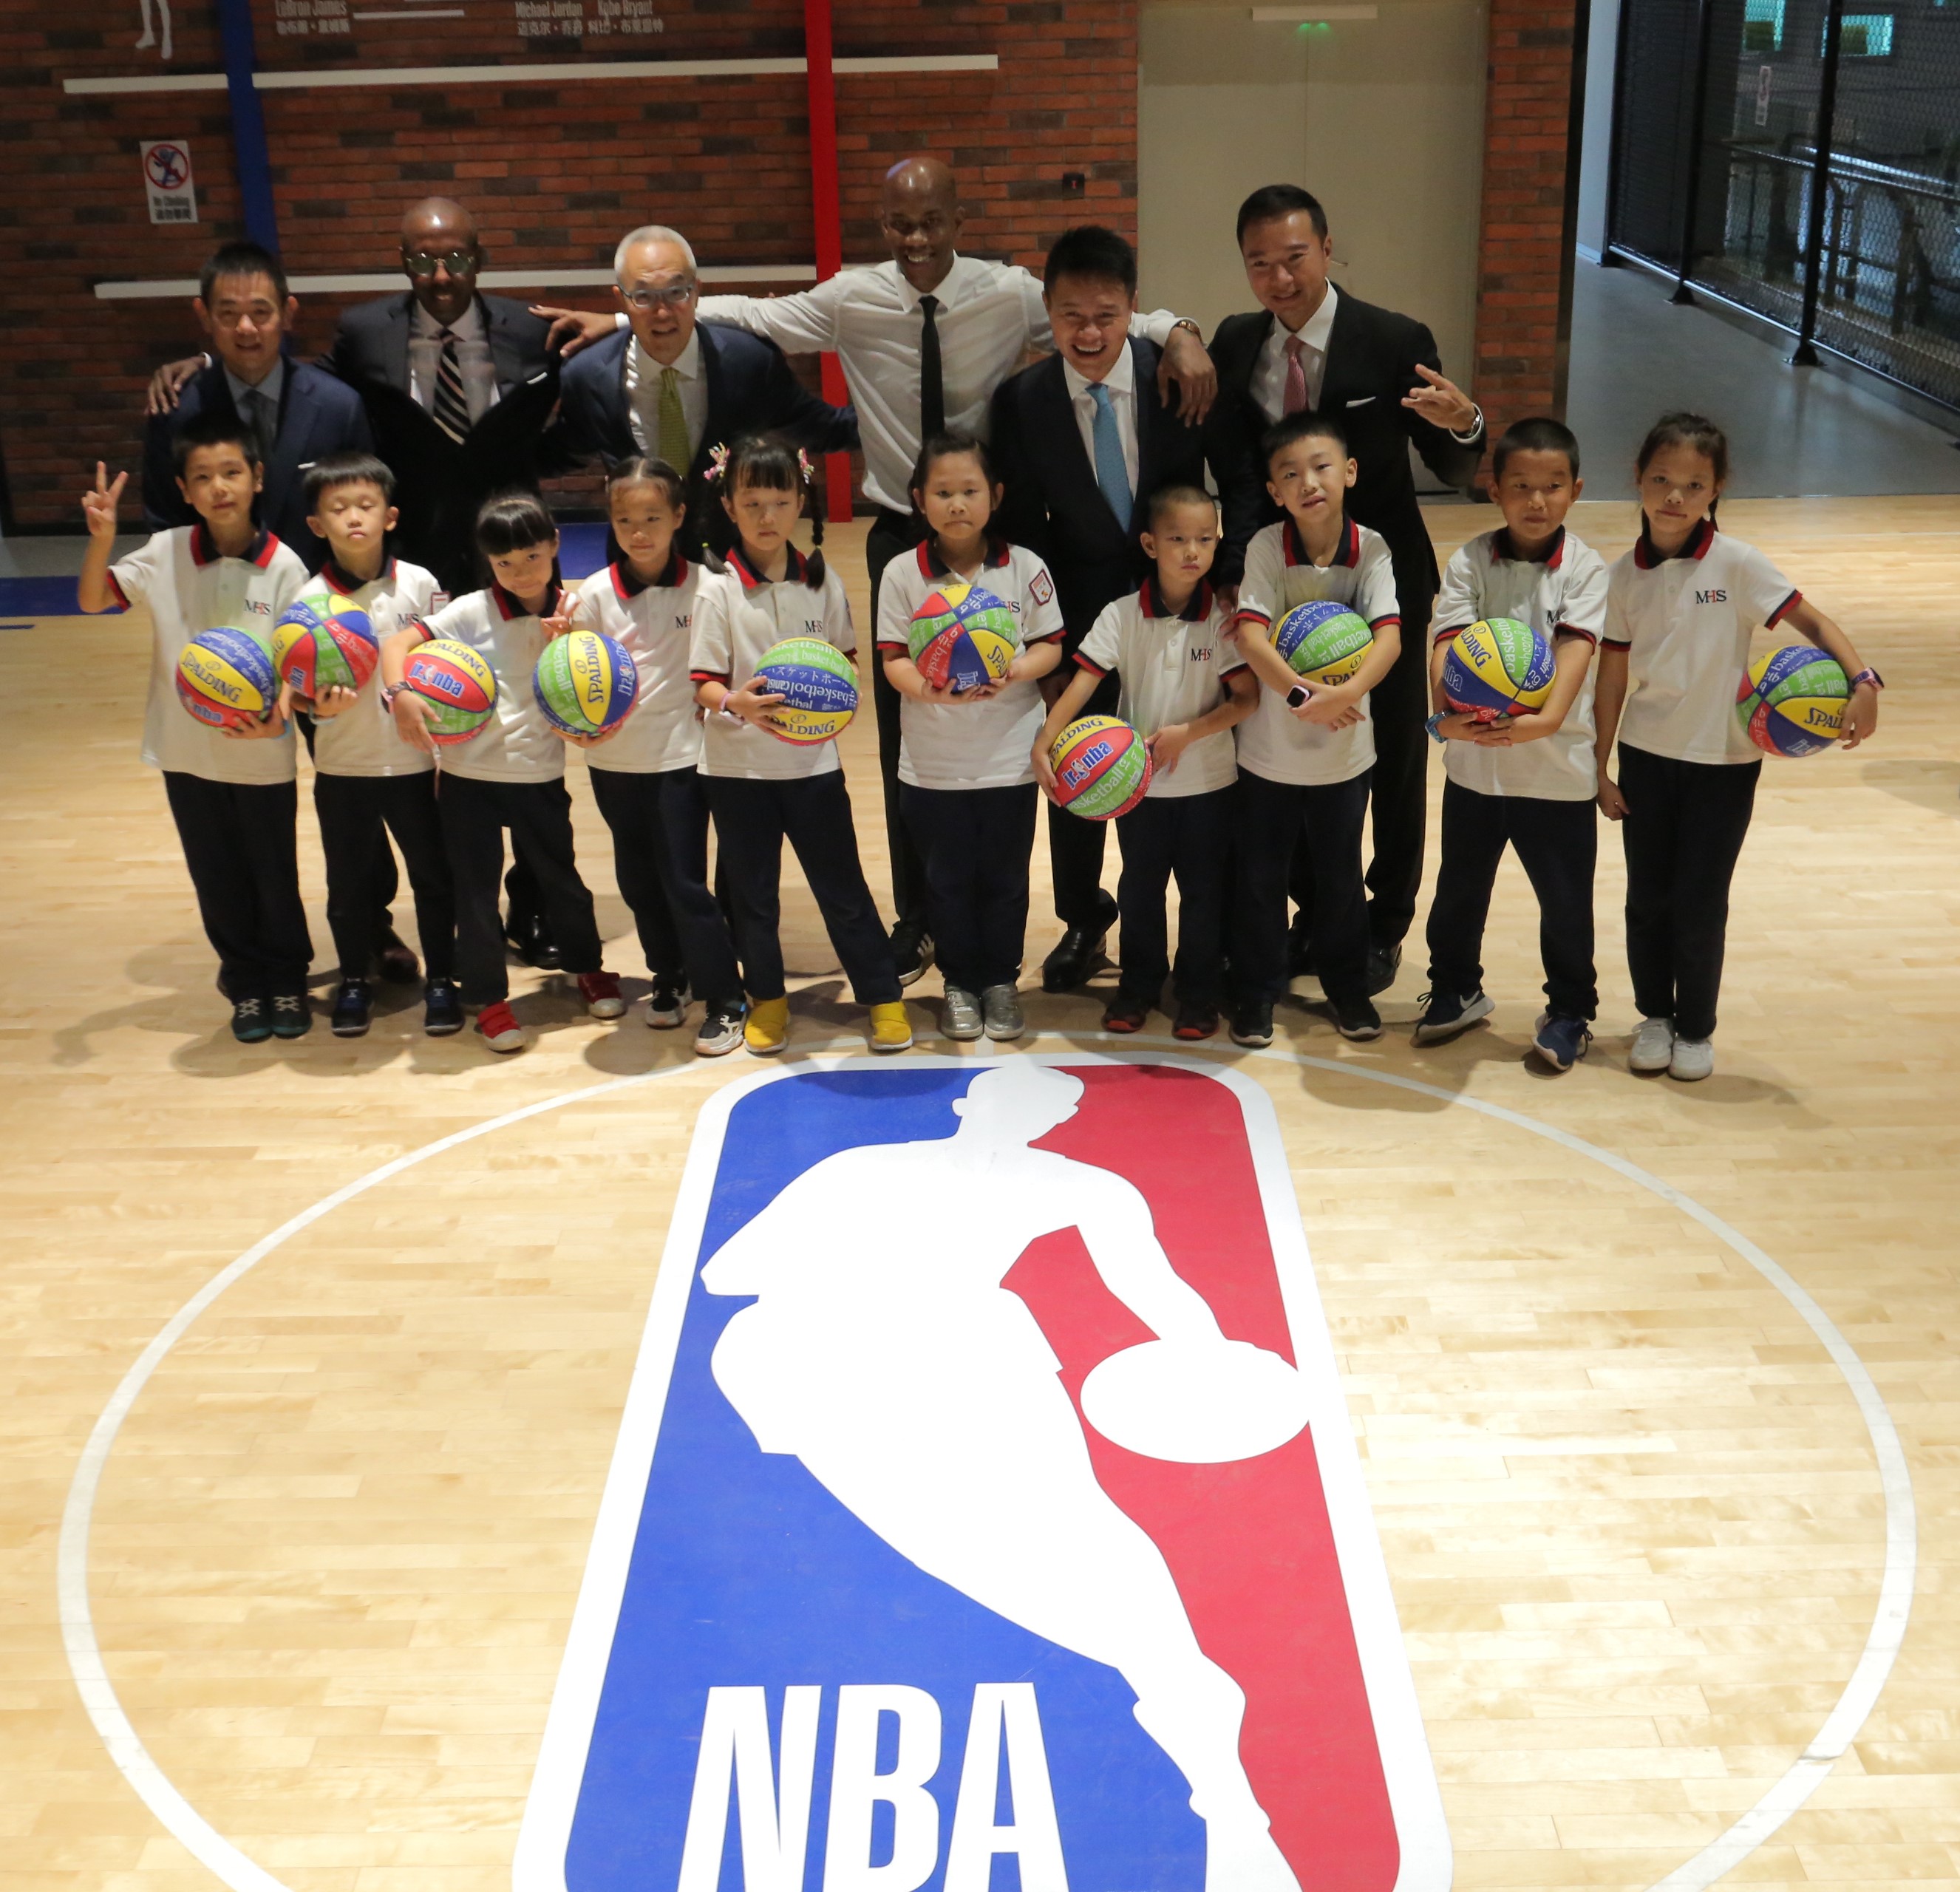 Photo 6 – Official opening of the NBA Exhibit at Mission Hills Haikou in Hainan, China